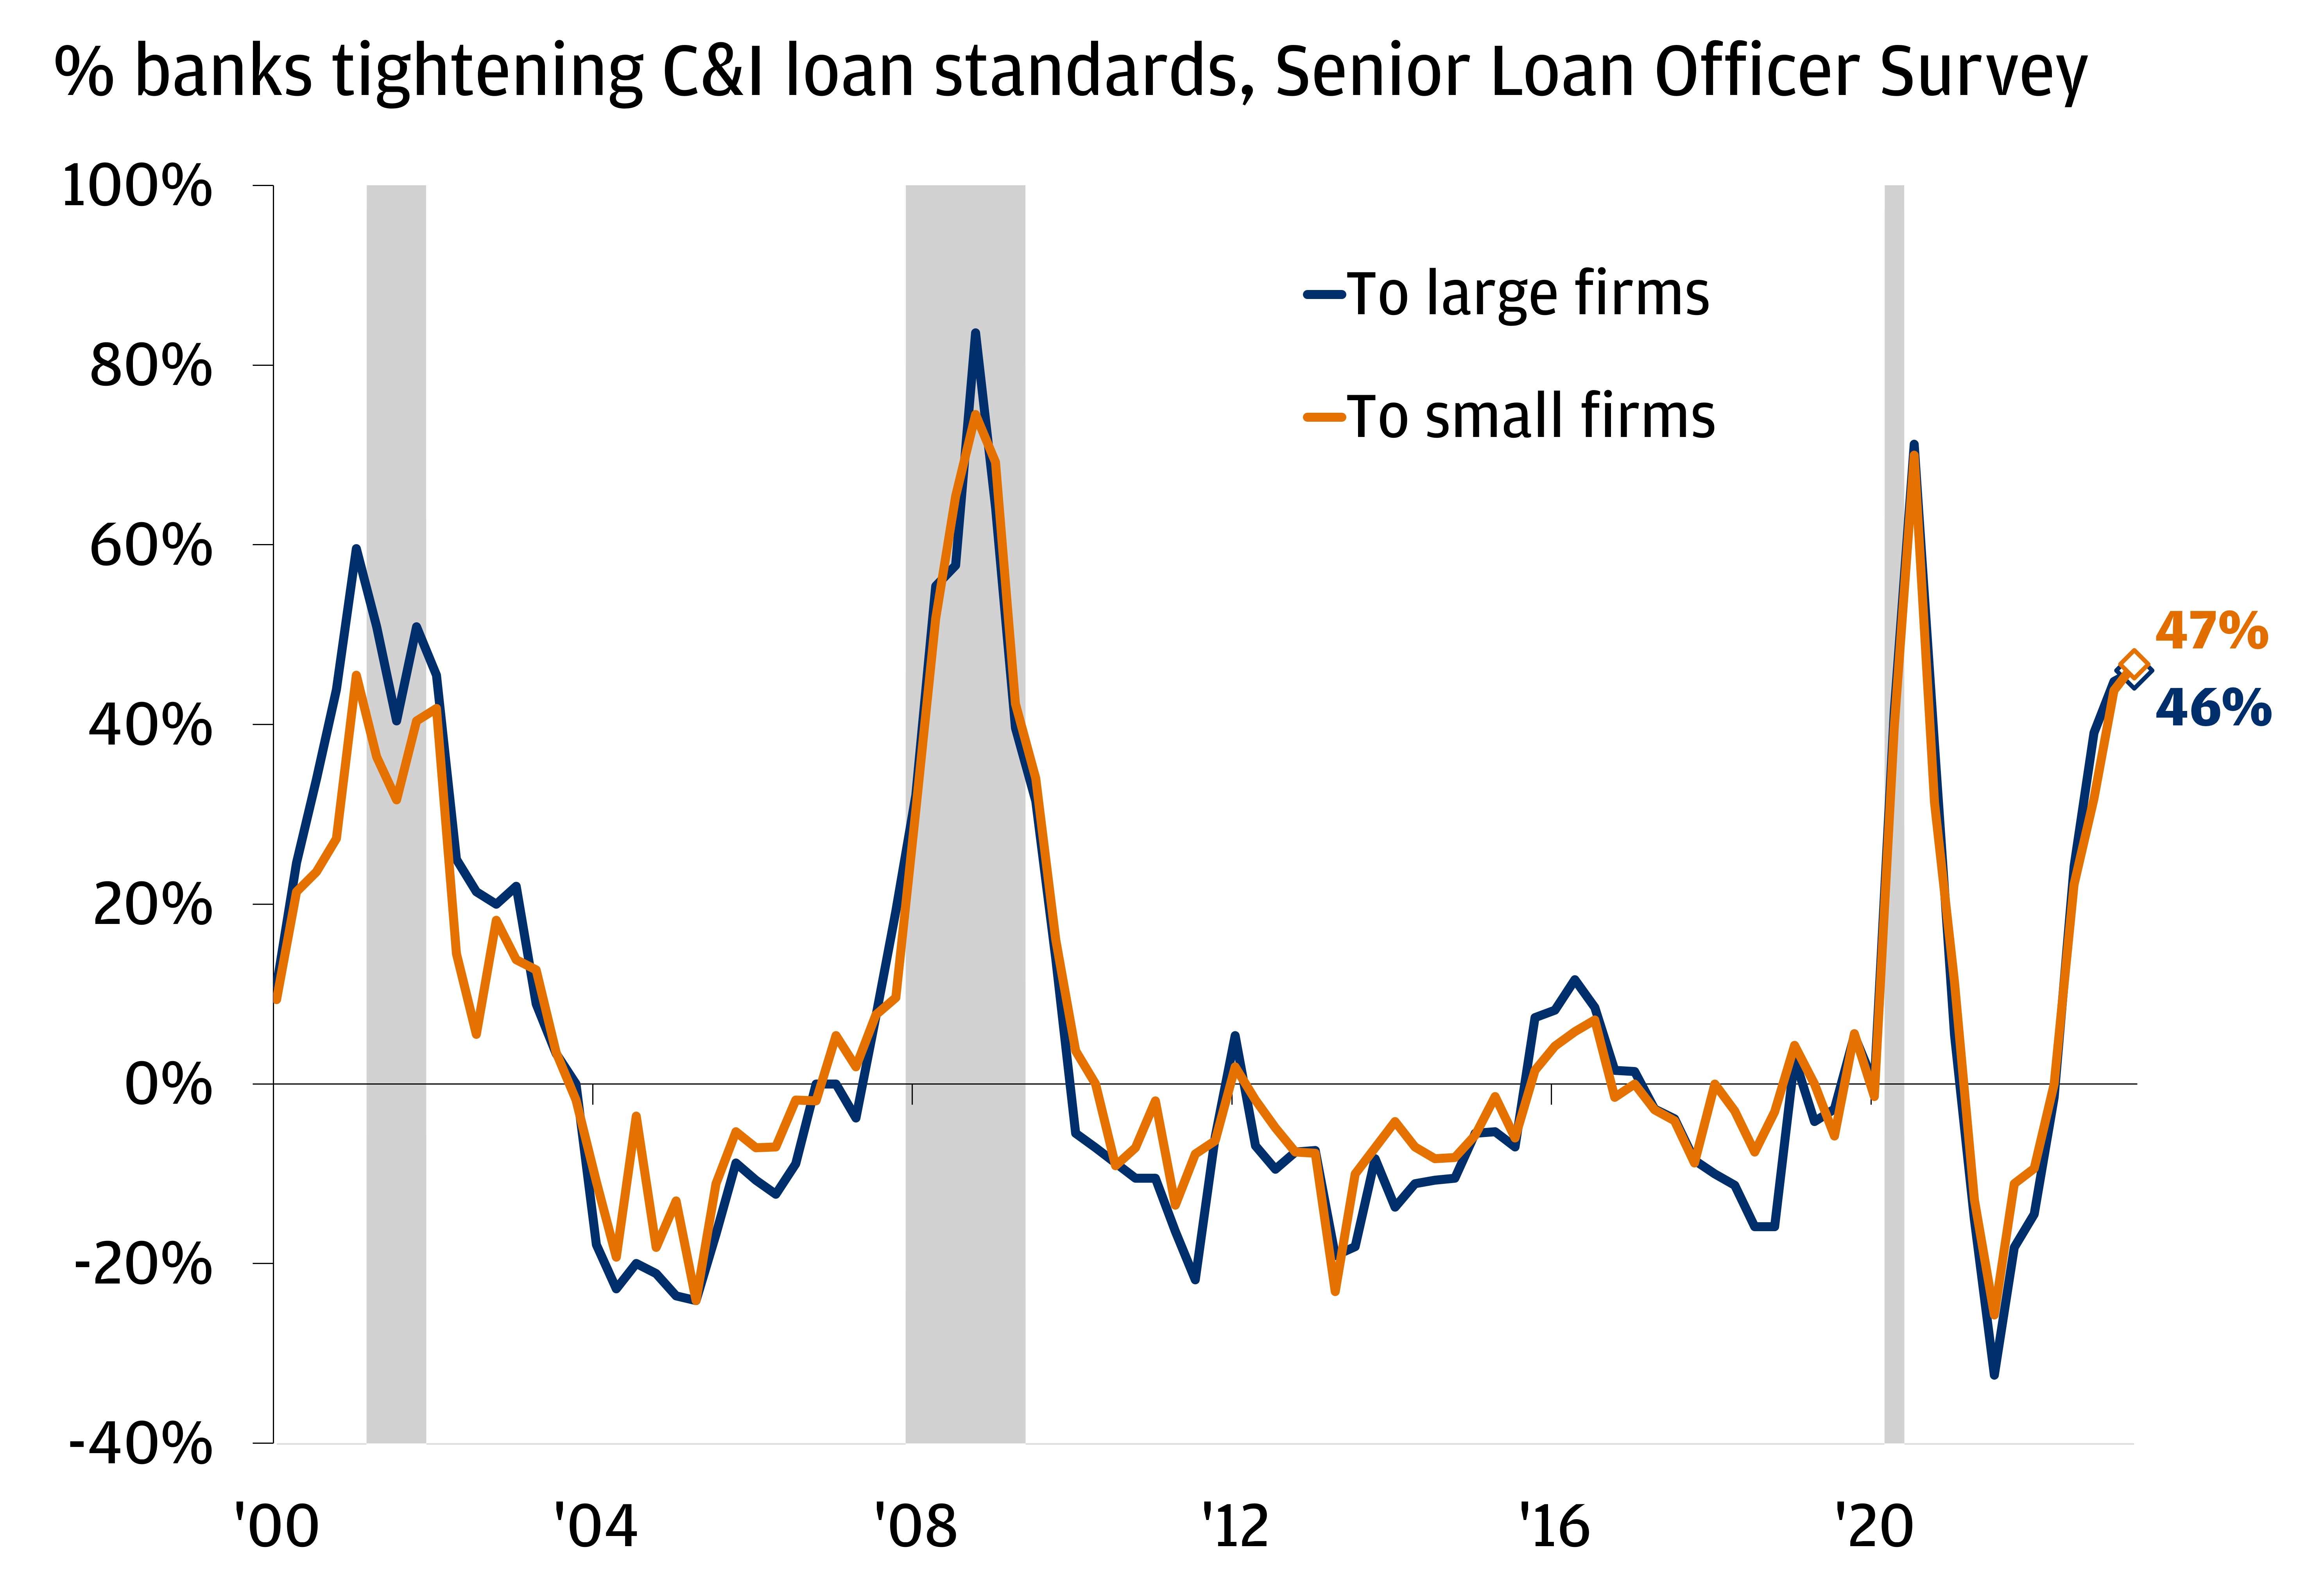 The chart describes the % of banks tightening C&I loan standards to large firms and small firms (two lines) according to the Senior Loan Officer Survey.